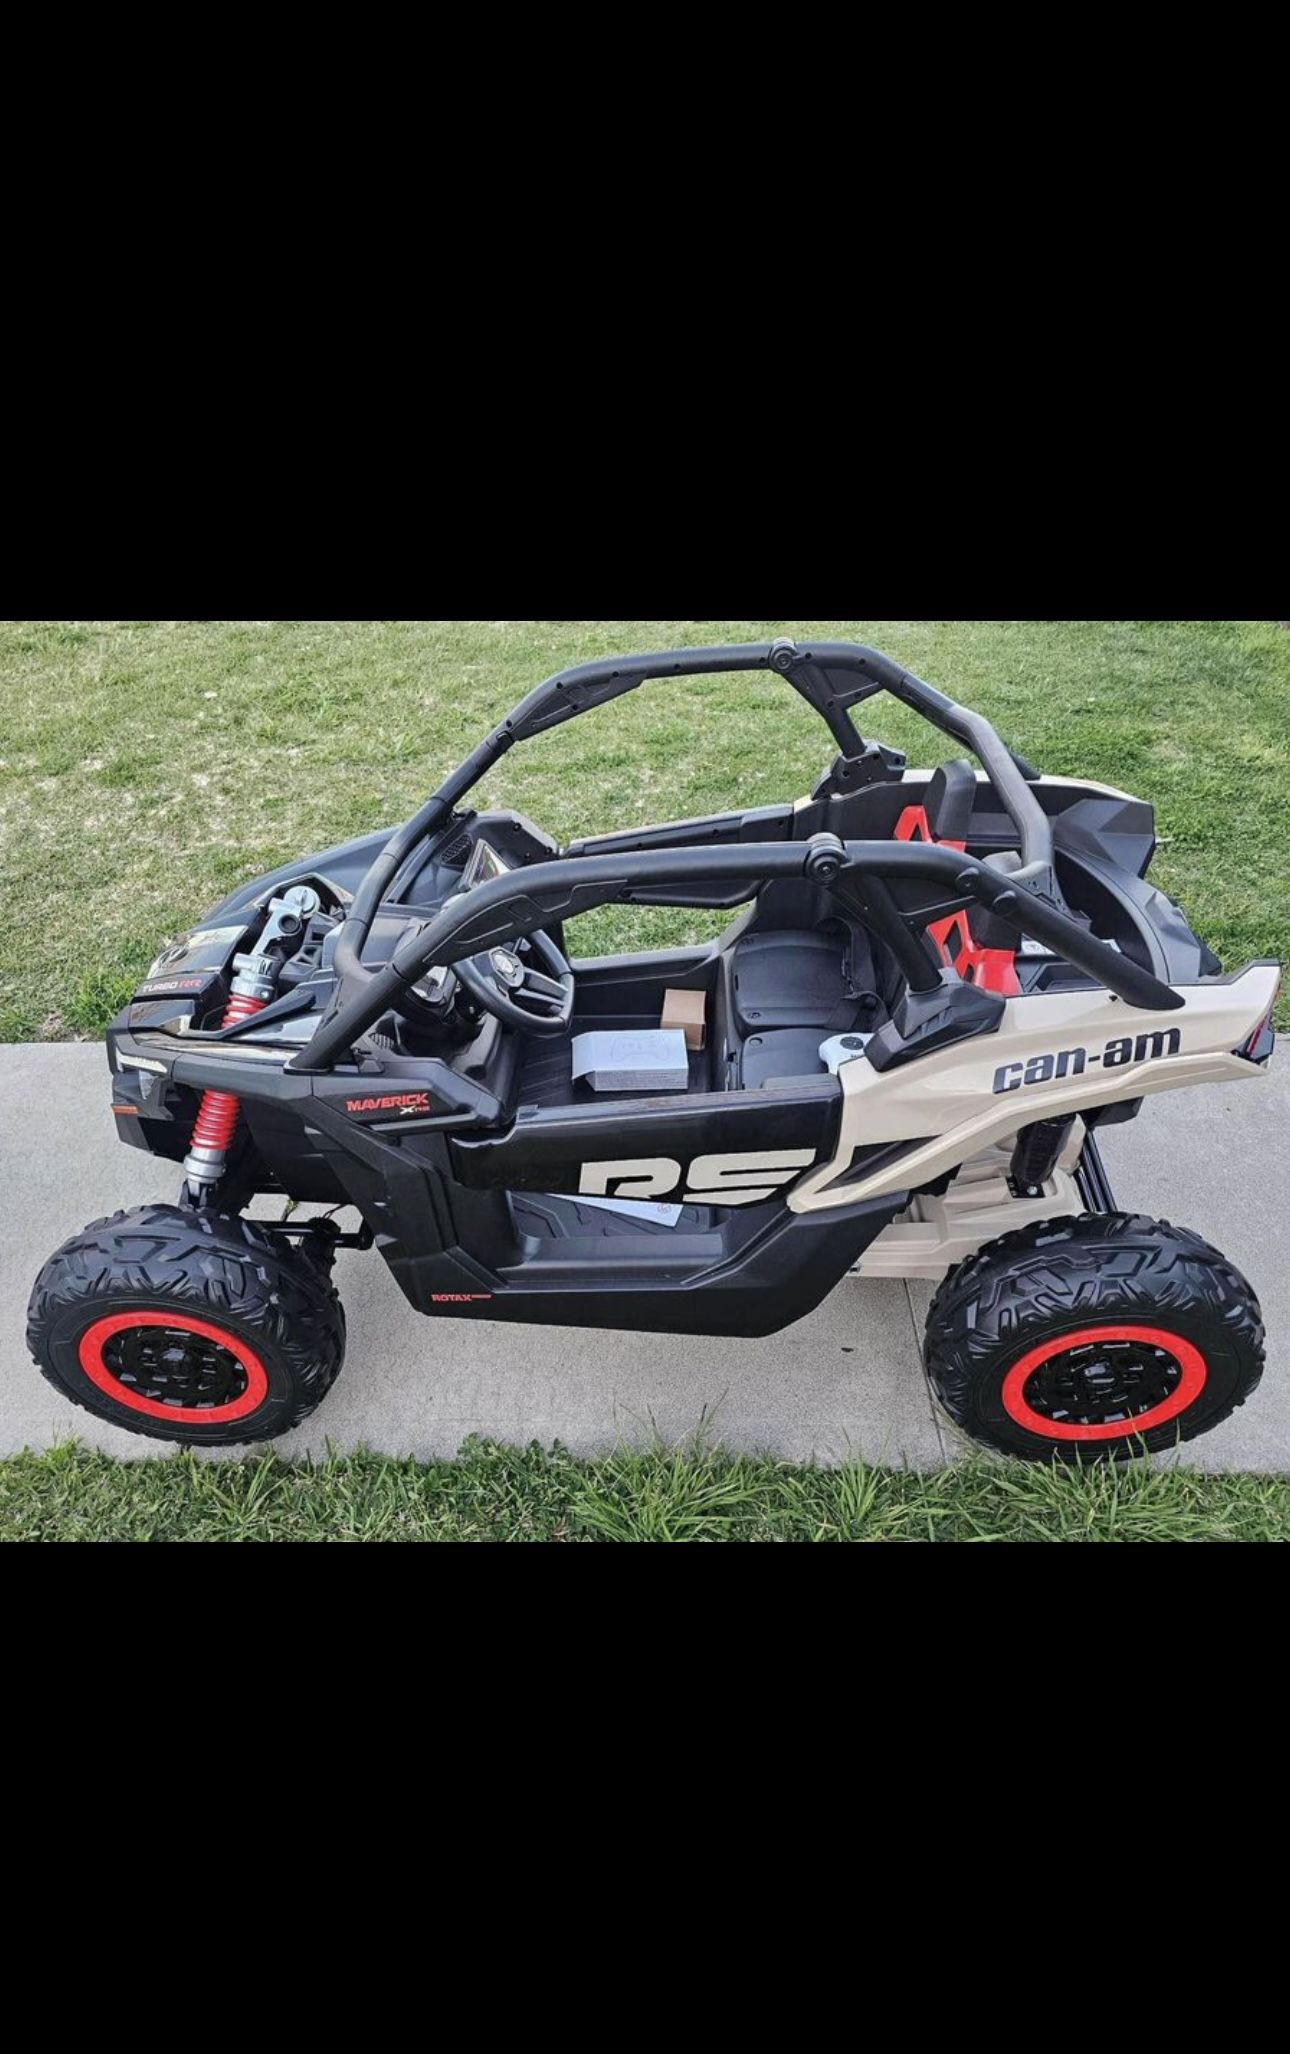 Brand New Can Am Ride On Toy For Kids 